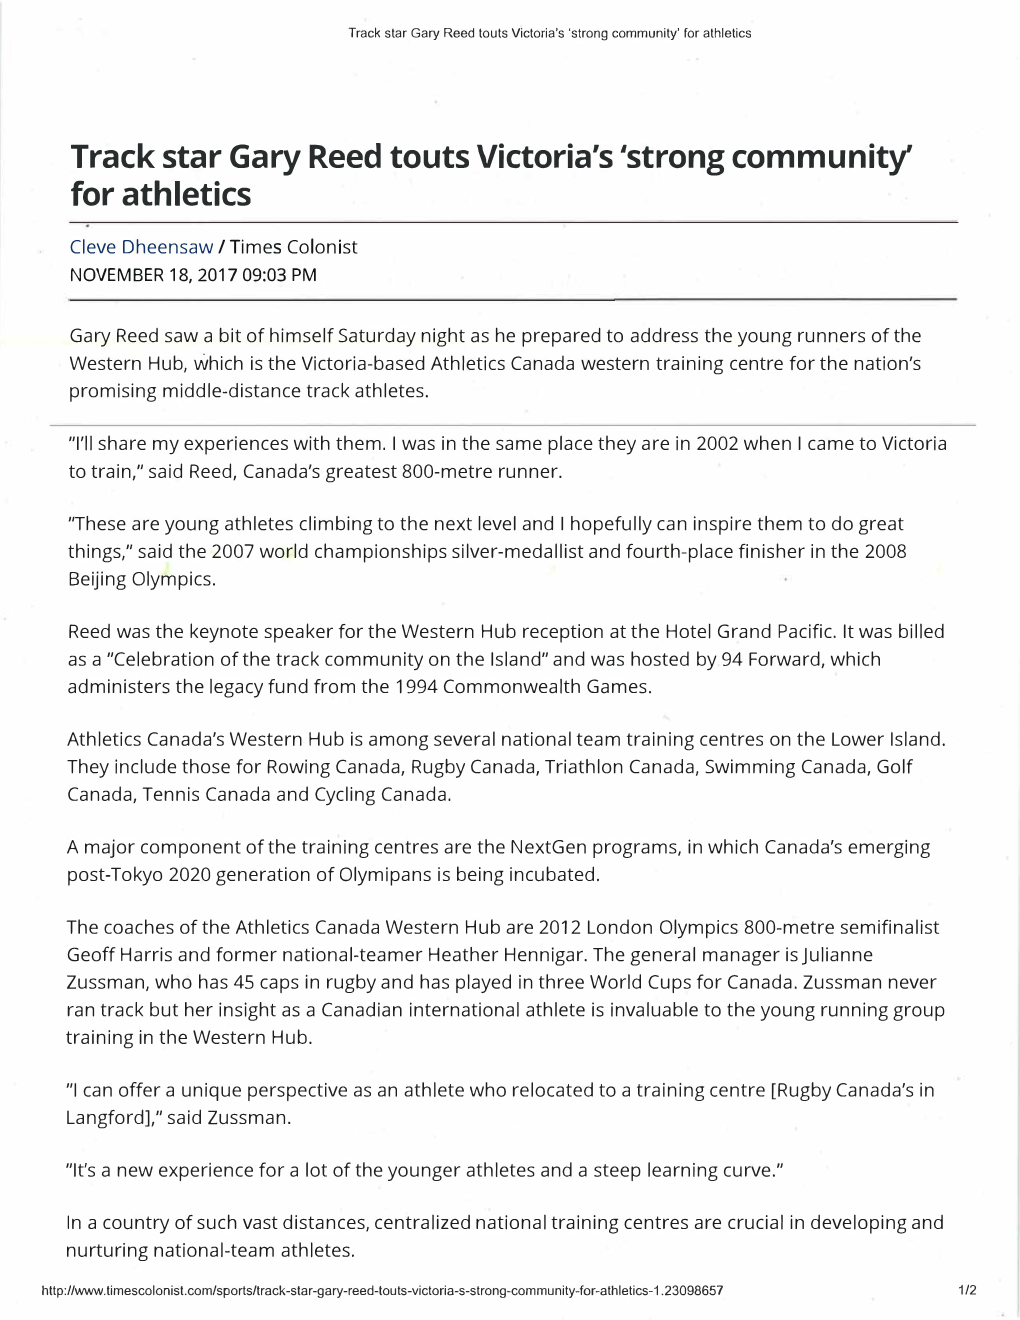 Track Star Gary Reed Touts Victoria's 'Strong Community' for Athletics